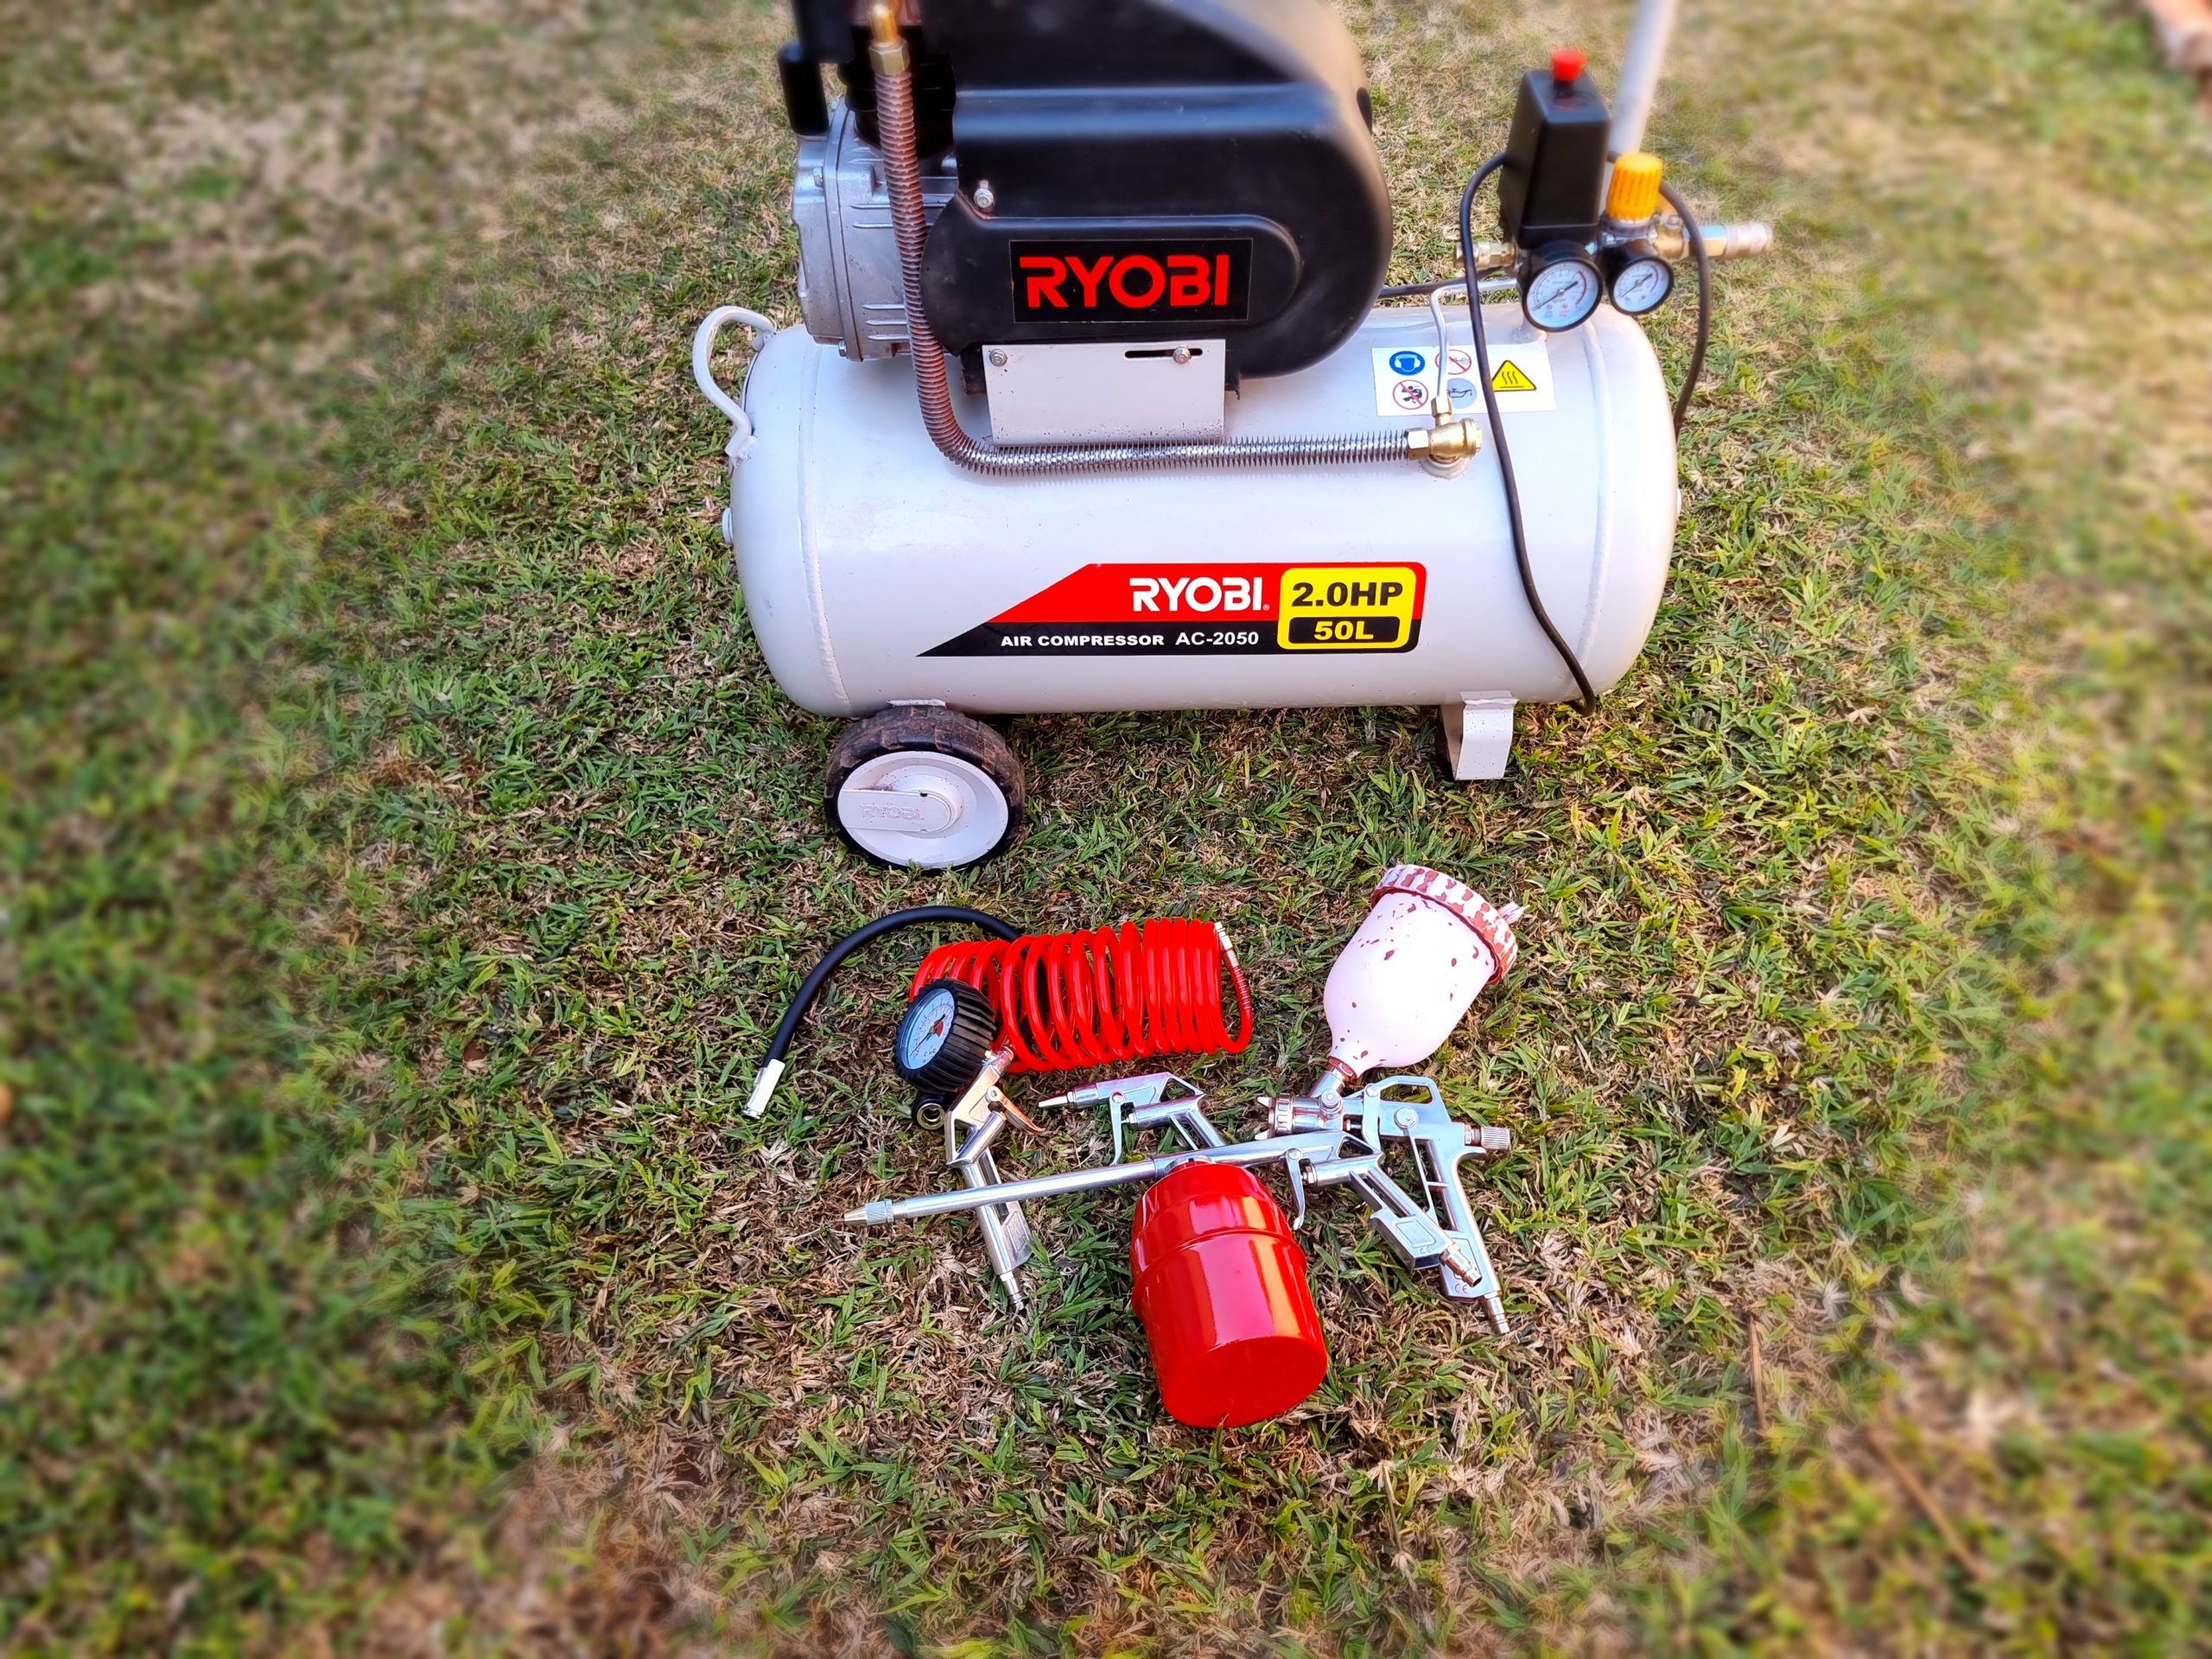 Ryobi 50L Air Compressor with Spray Gun Kit (1500W) – Perfect working condition, used